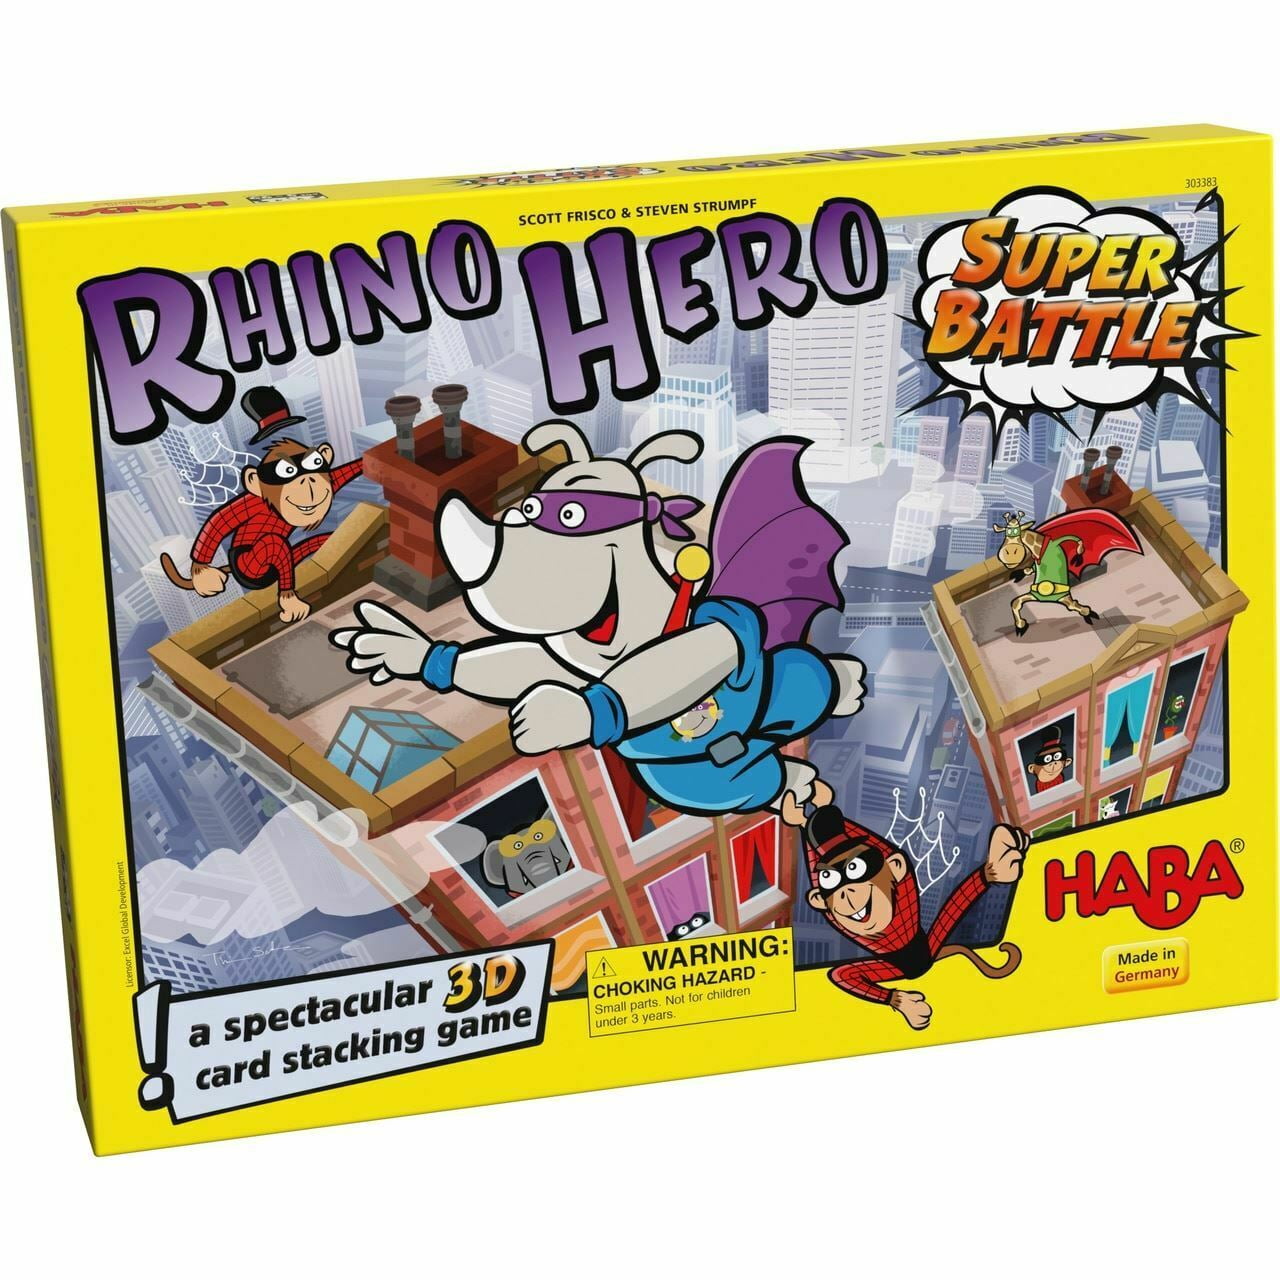 Rhino Hero is the 3D-stacking card game that can grow over 3 feet tall! 